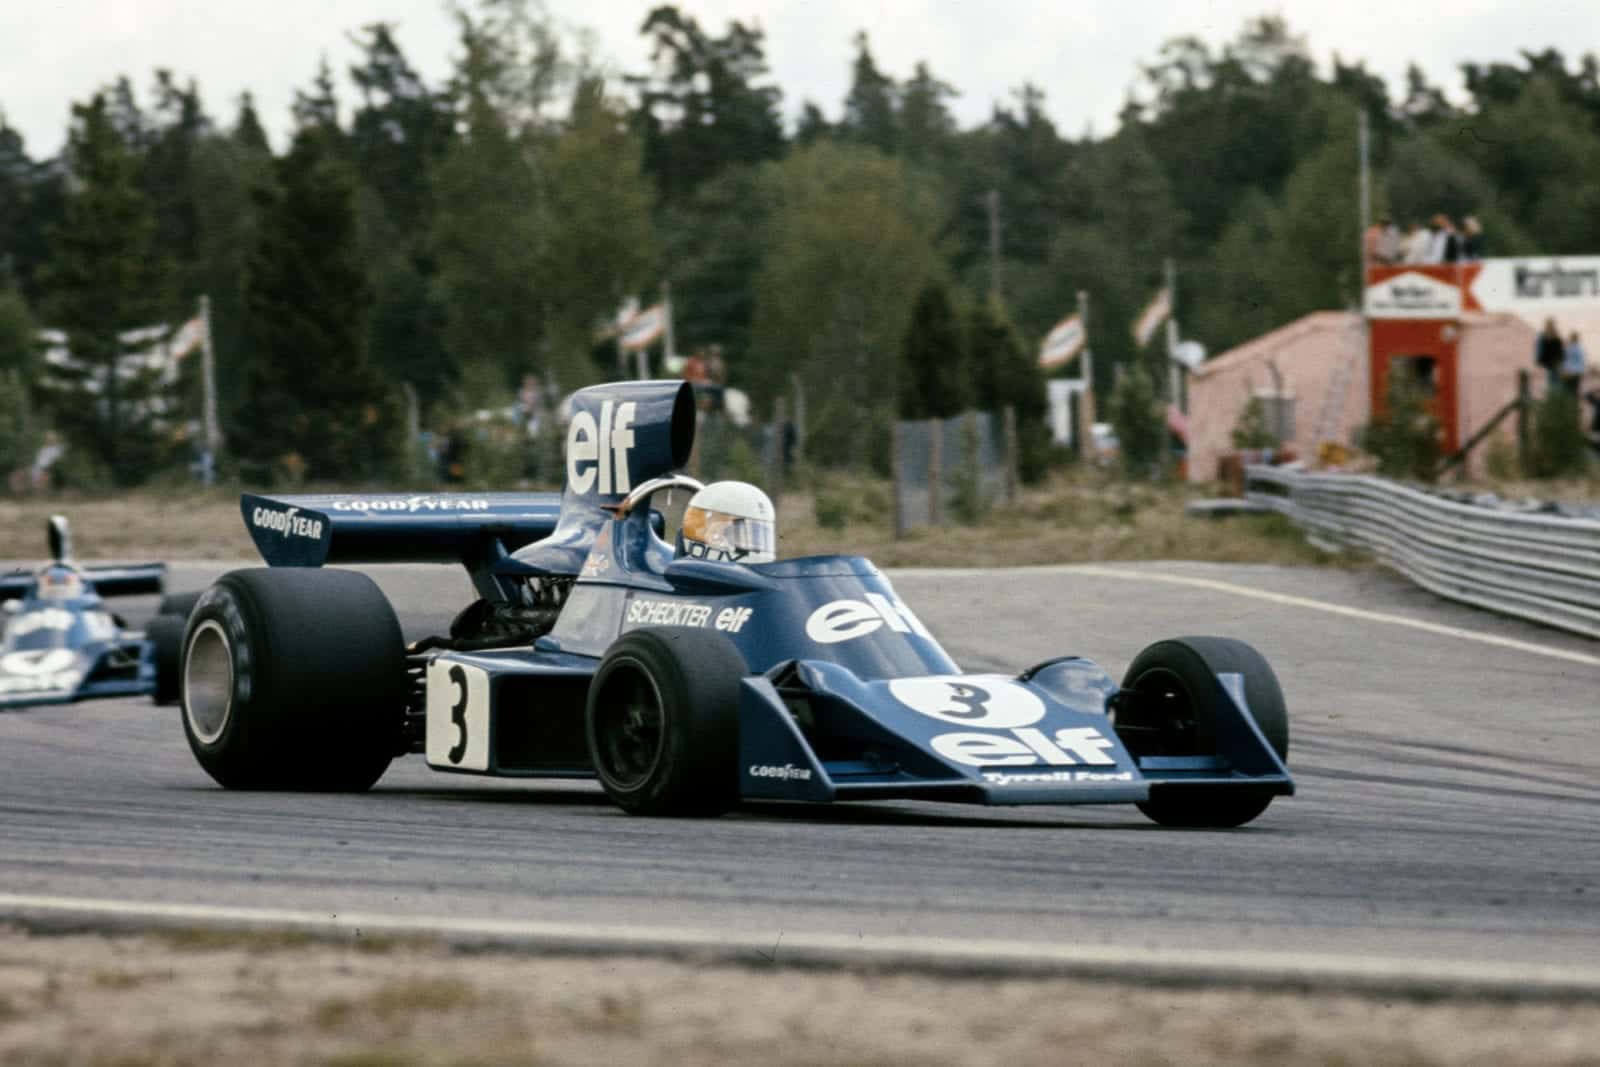 Jody Scheckter on the way to victory for Tyrrell at the 1974 Swedish Grand Prix.